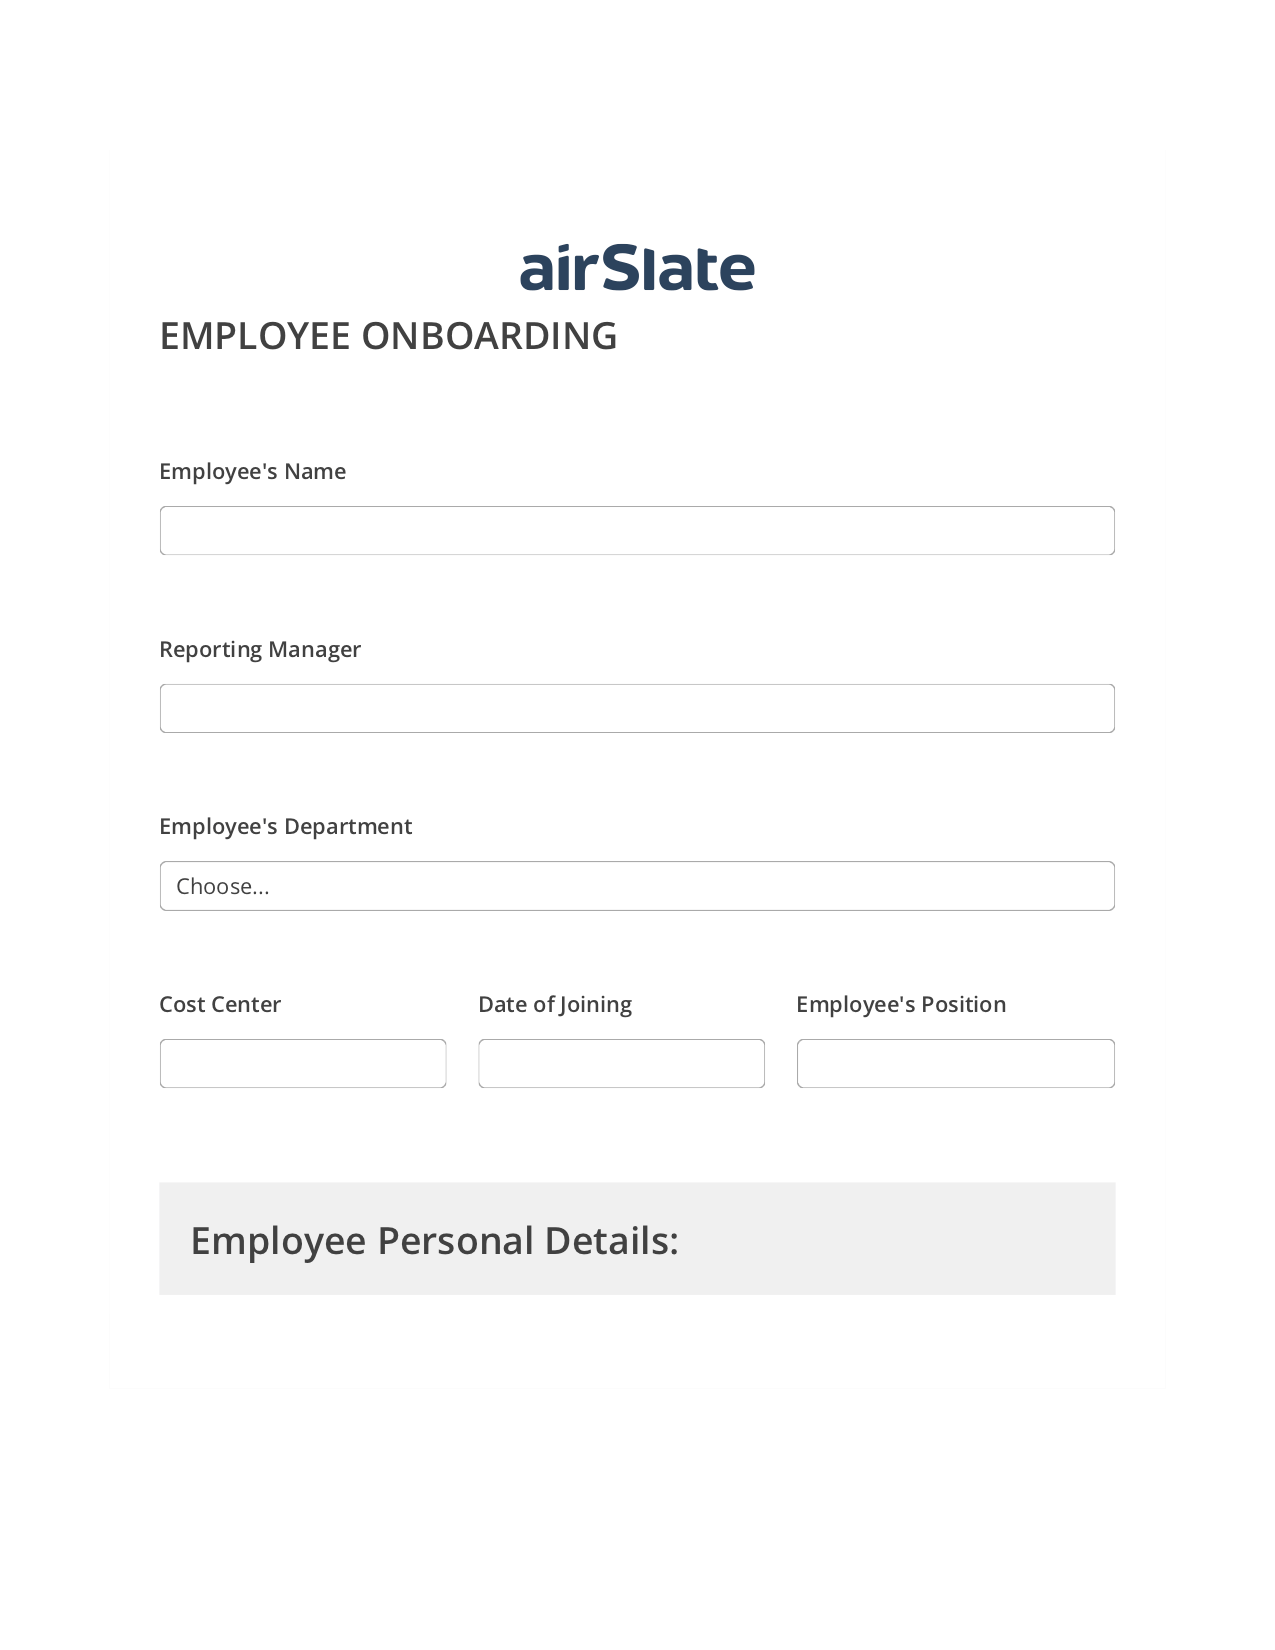 Employee Onboarding Workflow Pre-fill Slate from MS Dynamics 365 record, Update Audit Trail Bot, Archive to Box Bot